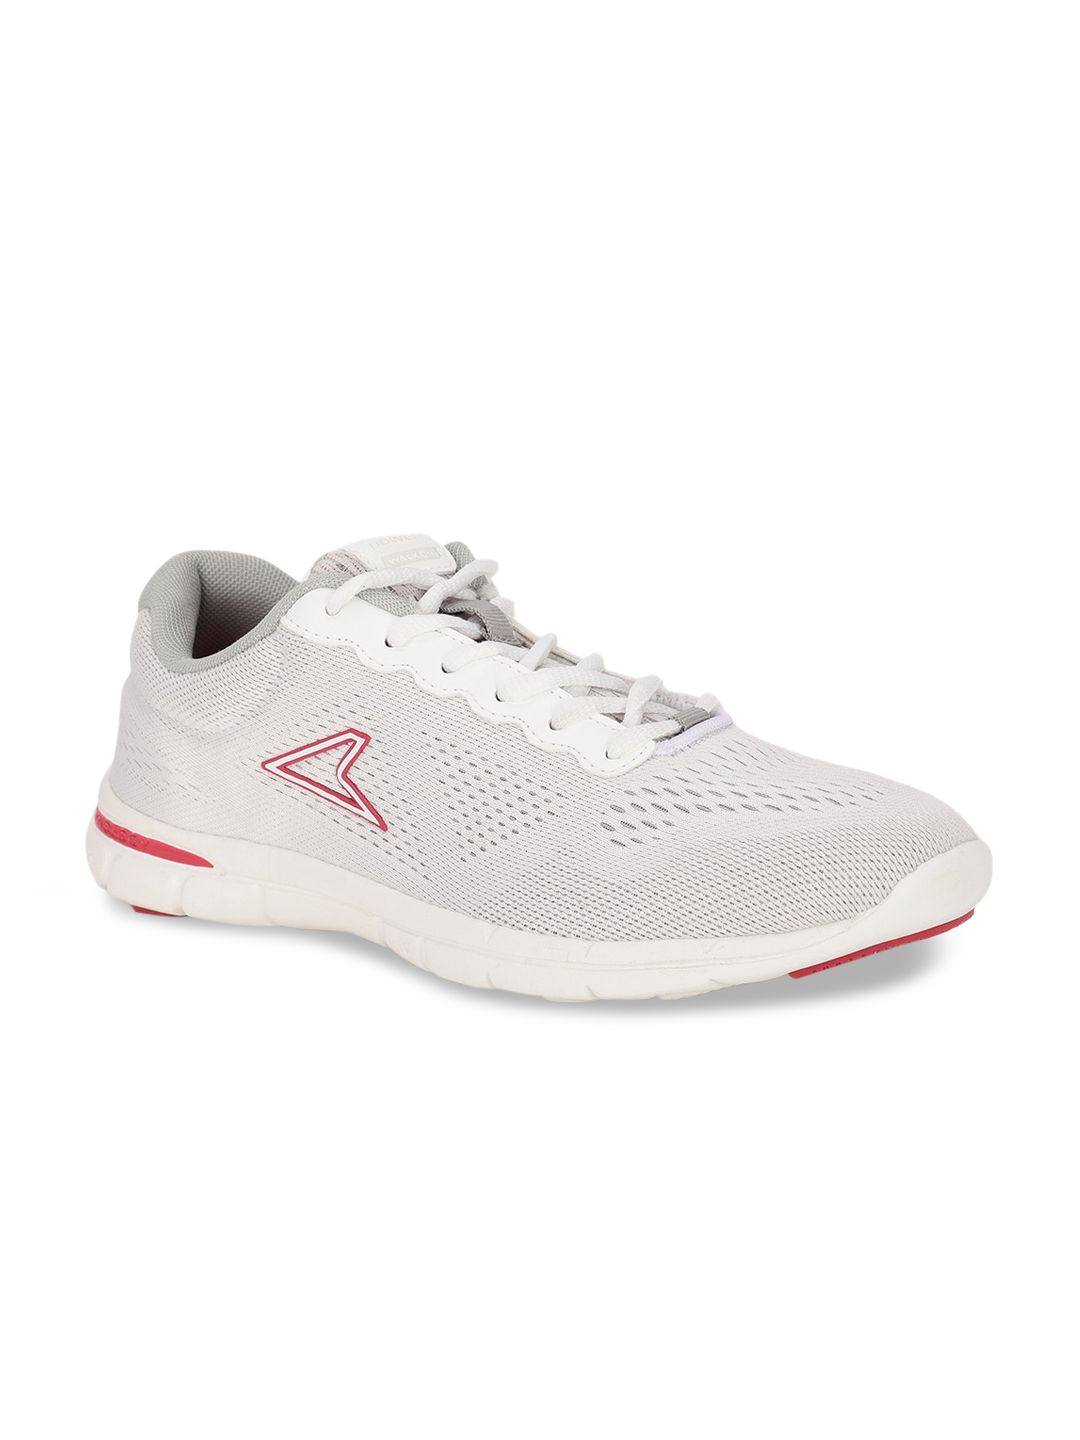 Power Women White Woven Design Sneakers Price in India